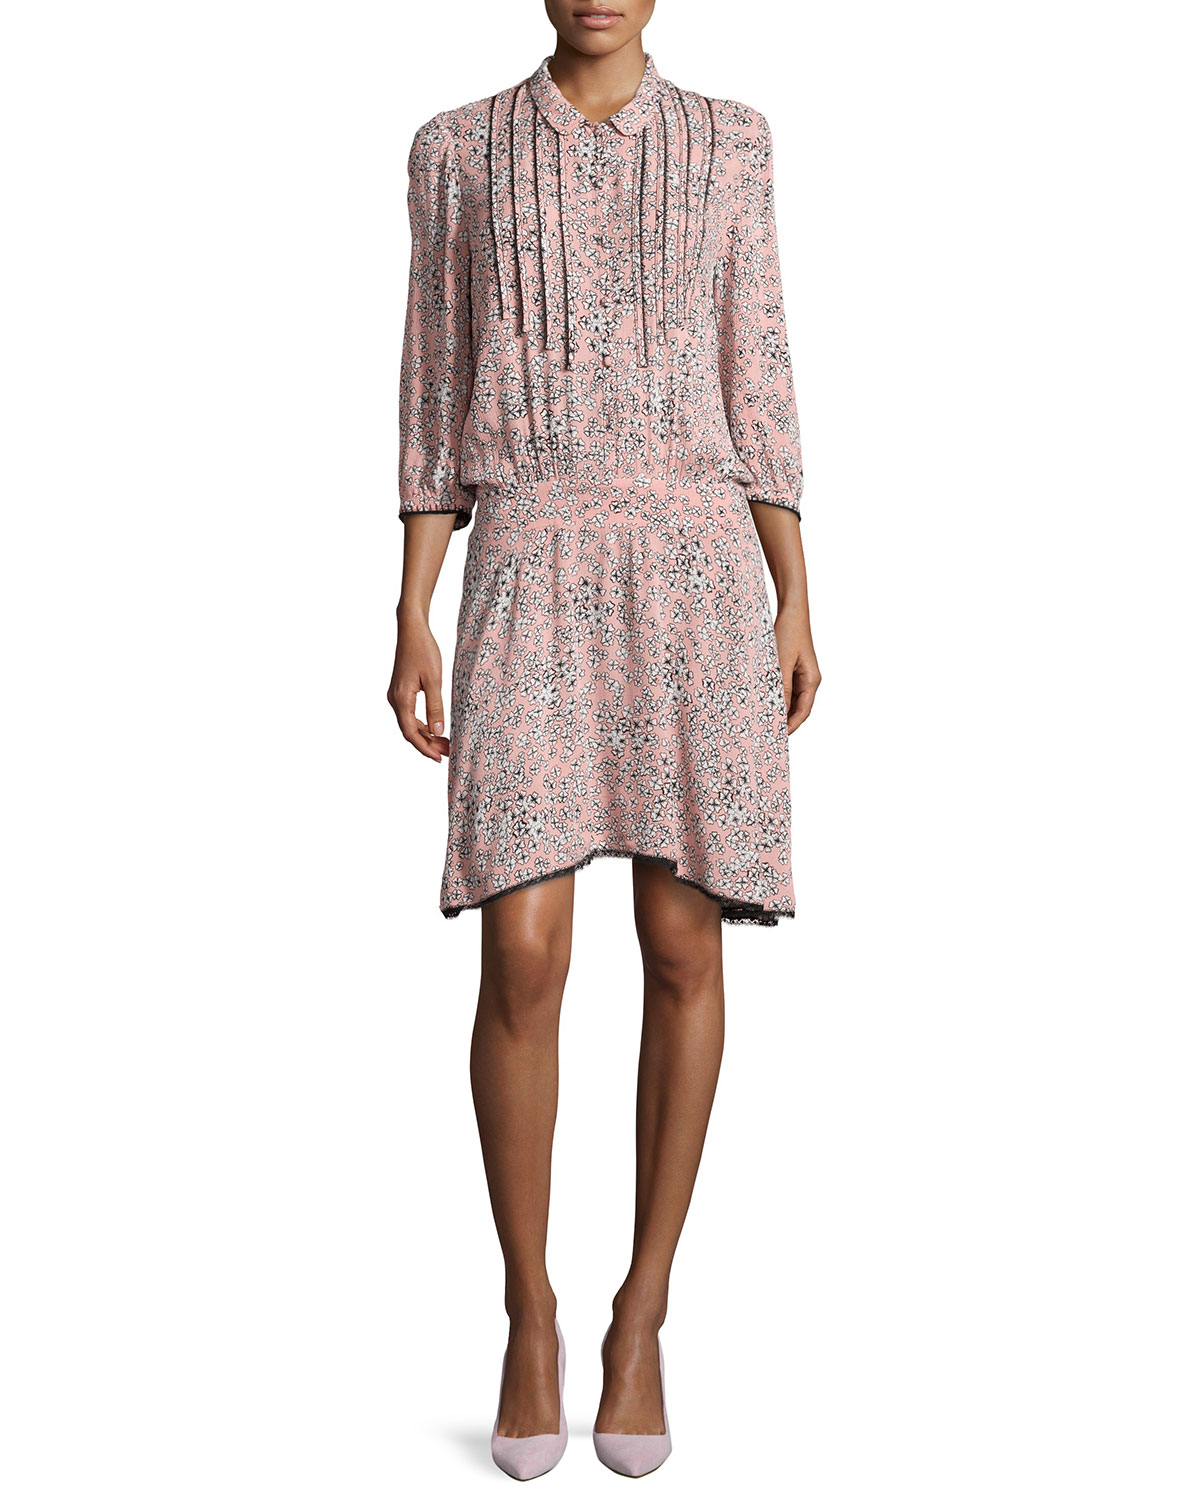 Zadig & Voltaire Lace-Trim Floral-Print Dress in Brown - Lyst